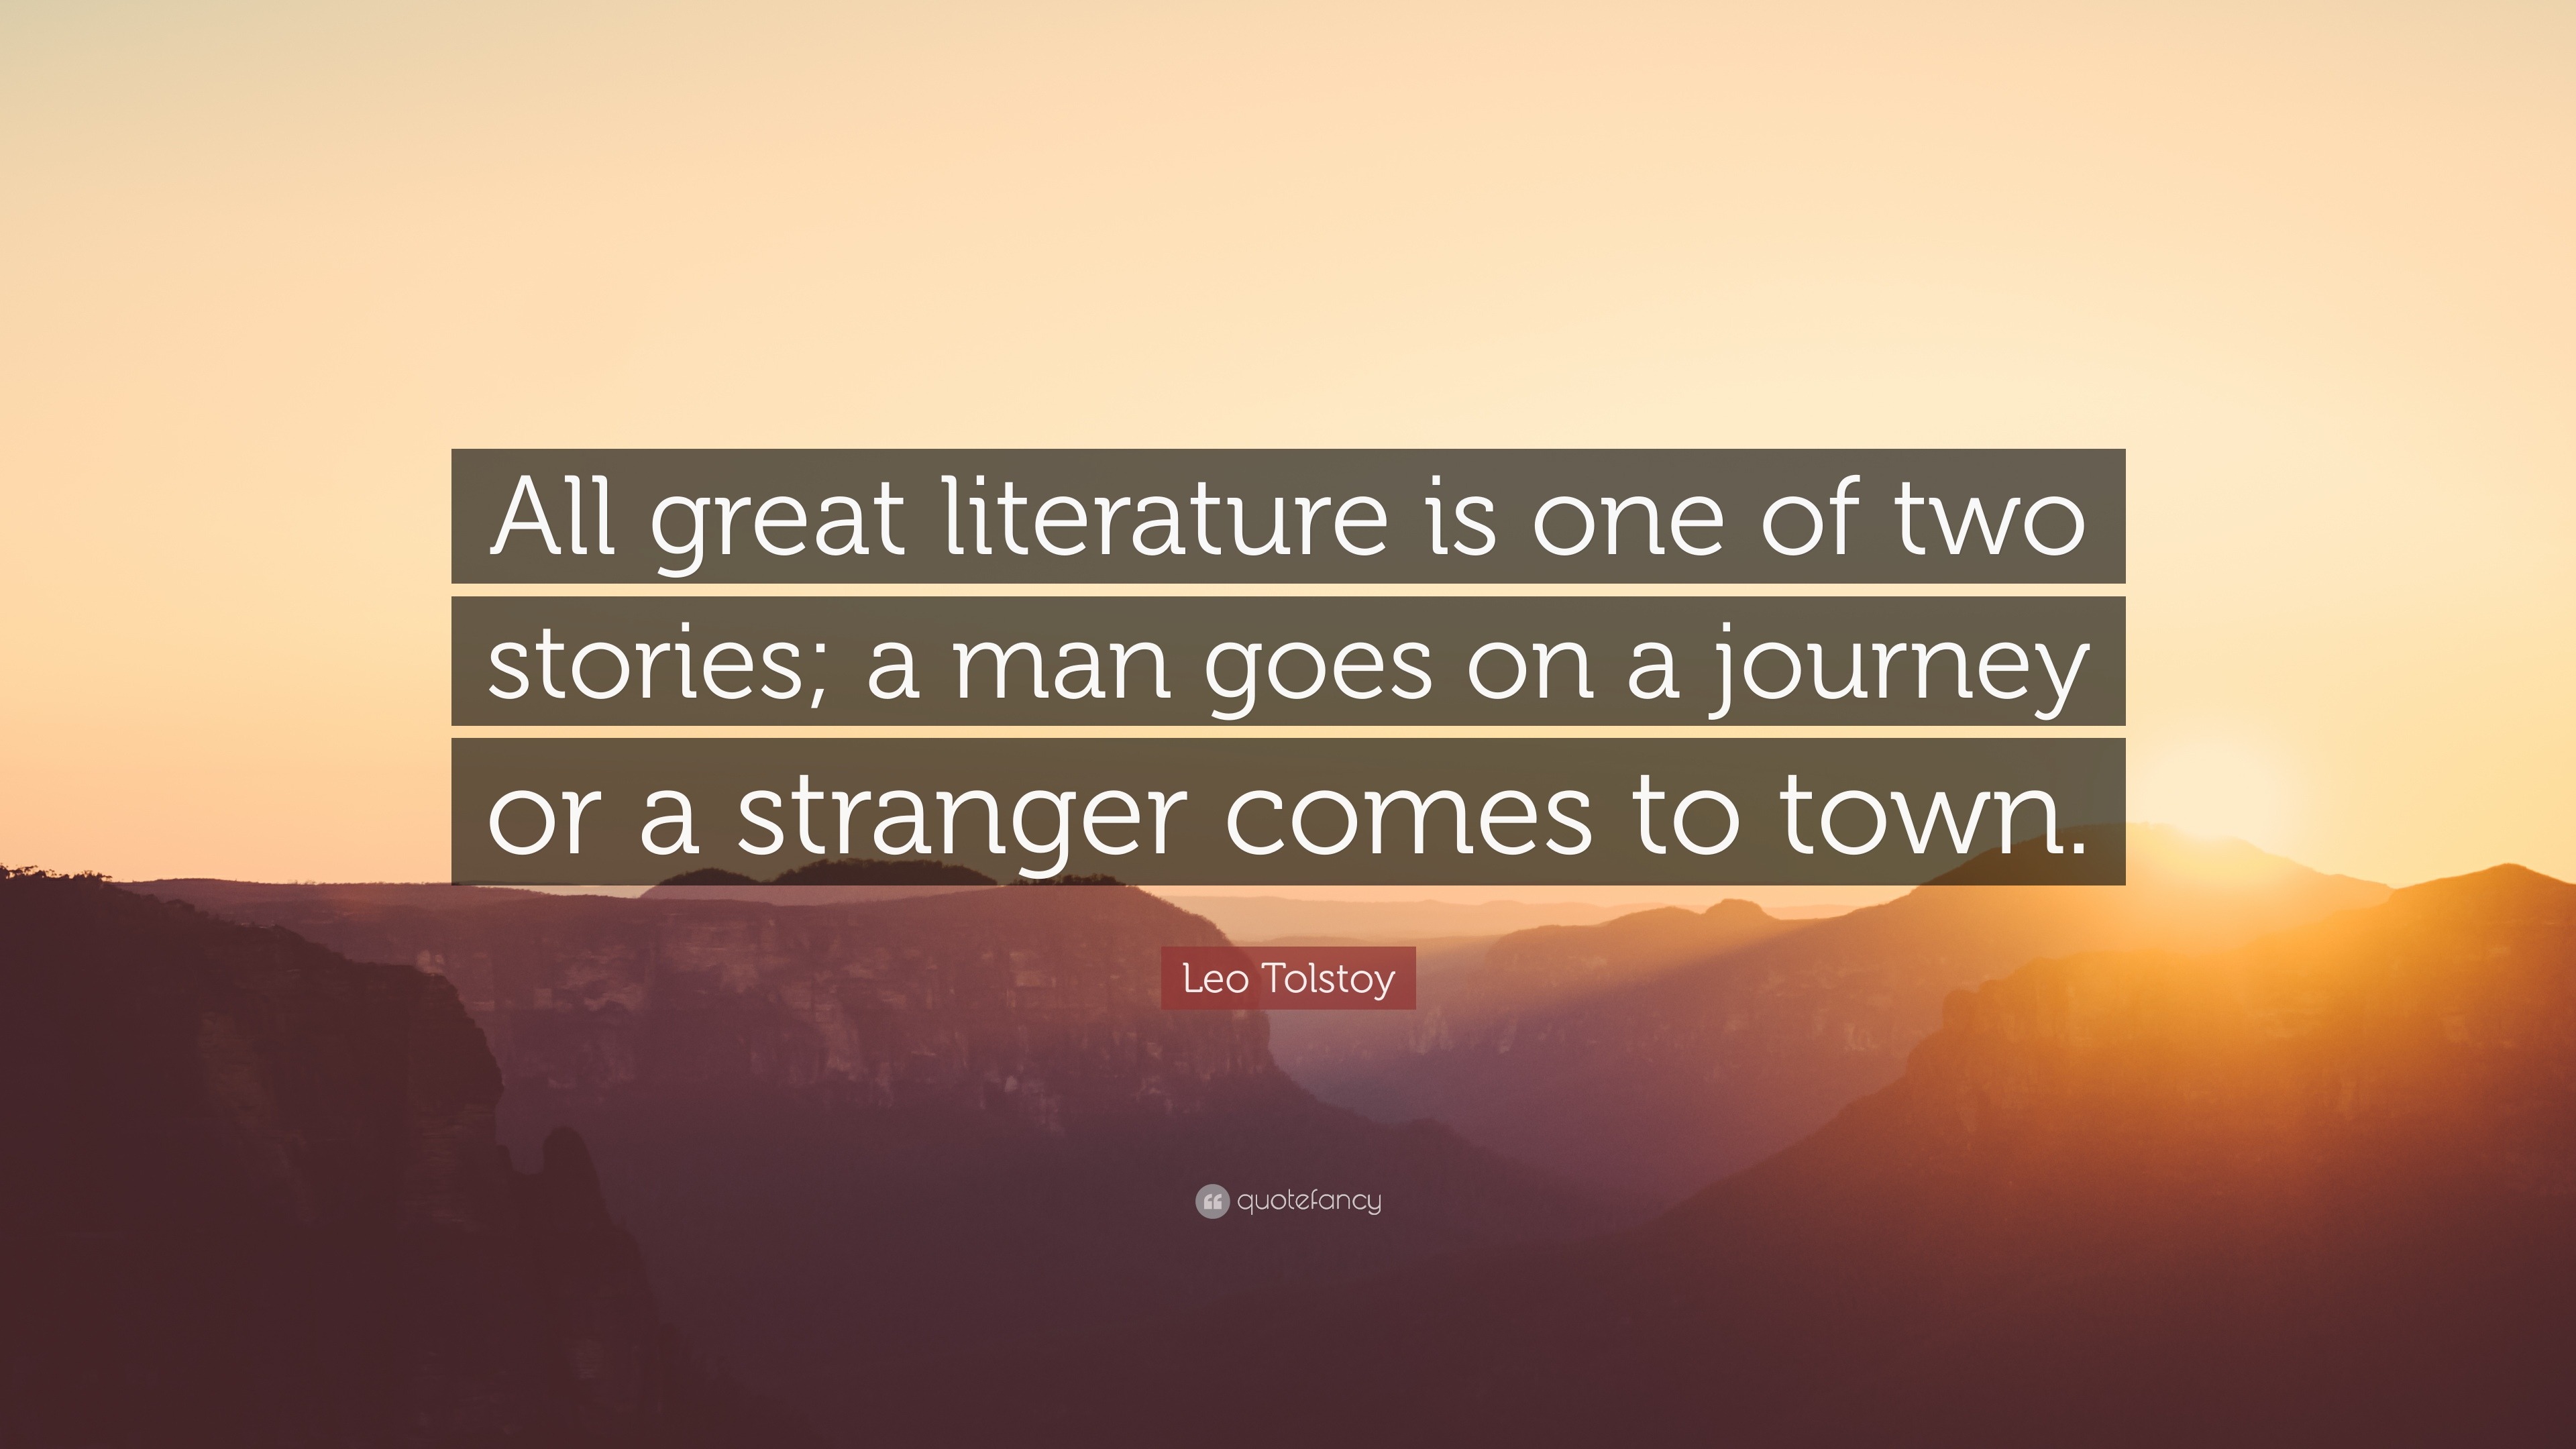 Leo Tolstoy Quote: “All great literature is one of two stories; a man